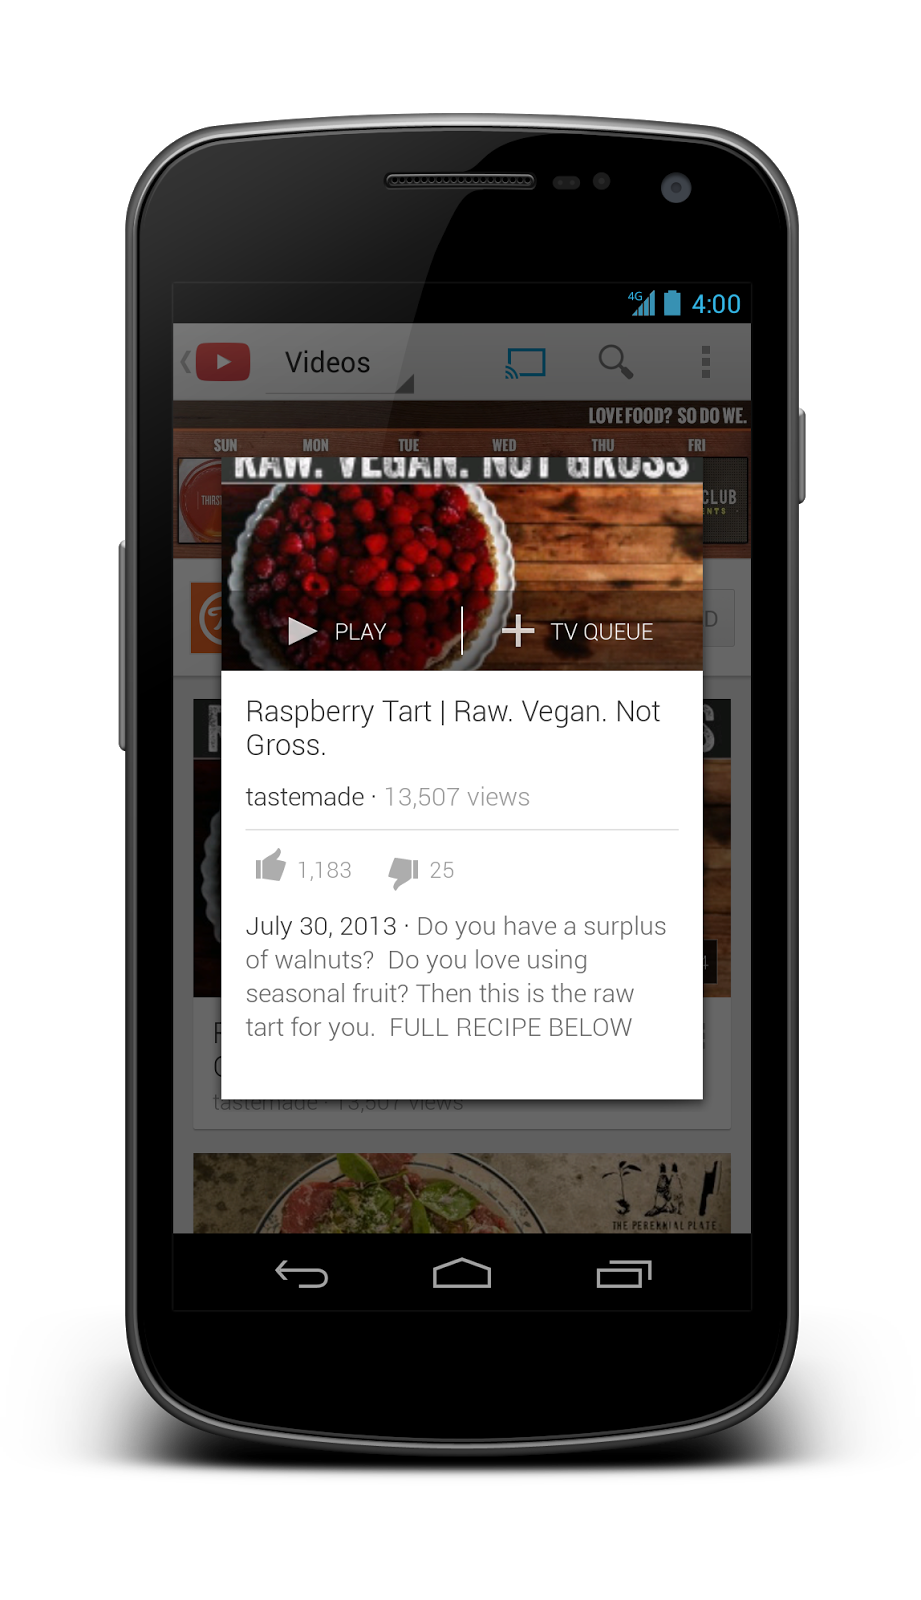 YouTube's latest app updates for iOS and Android